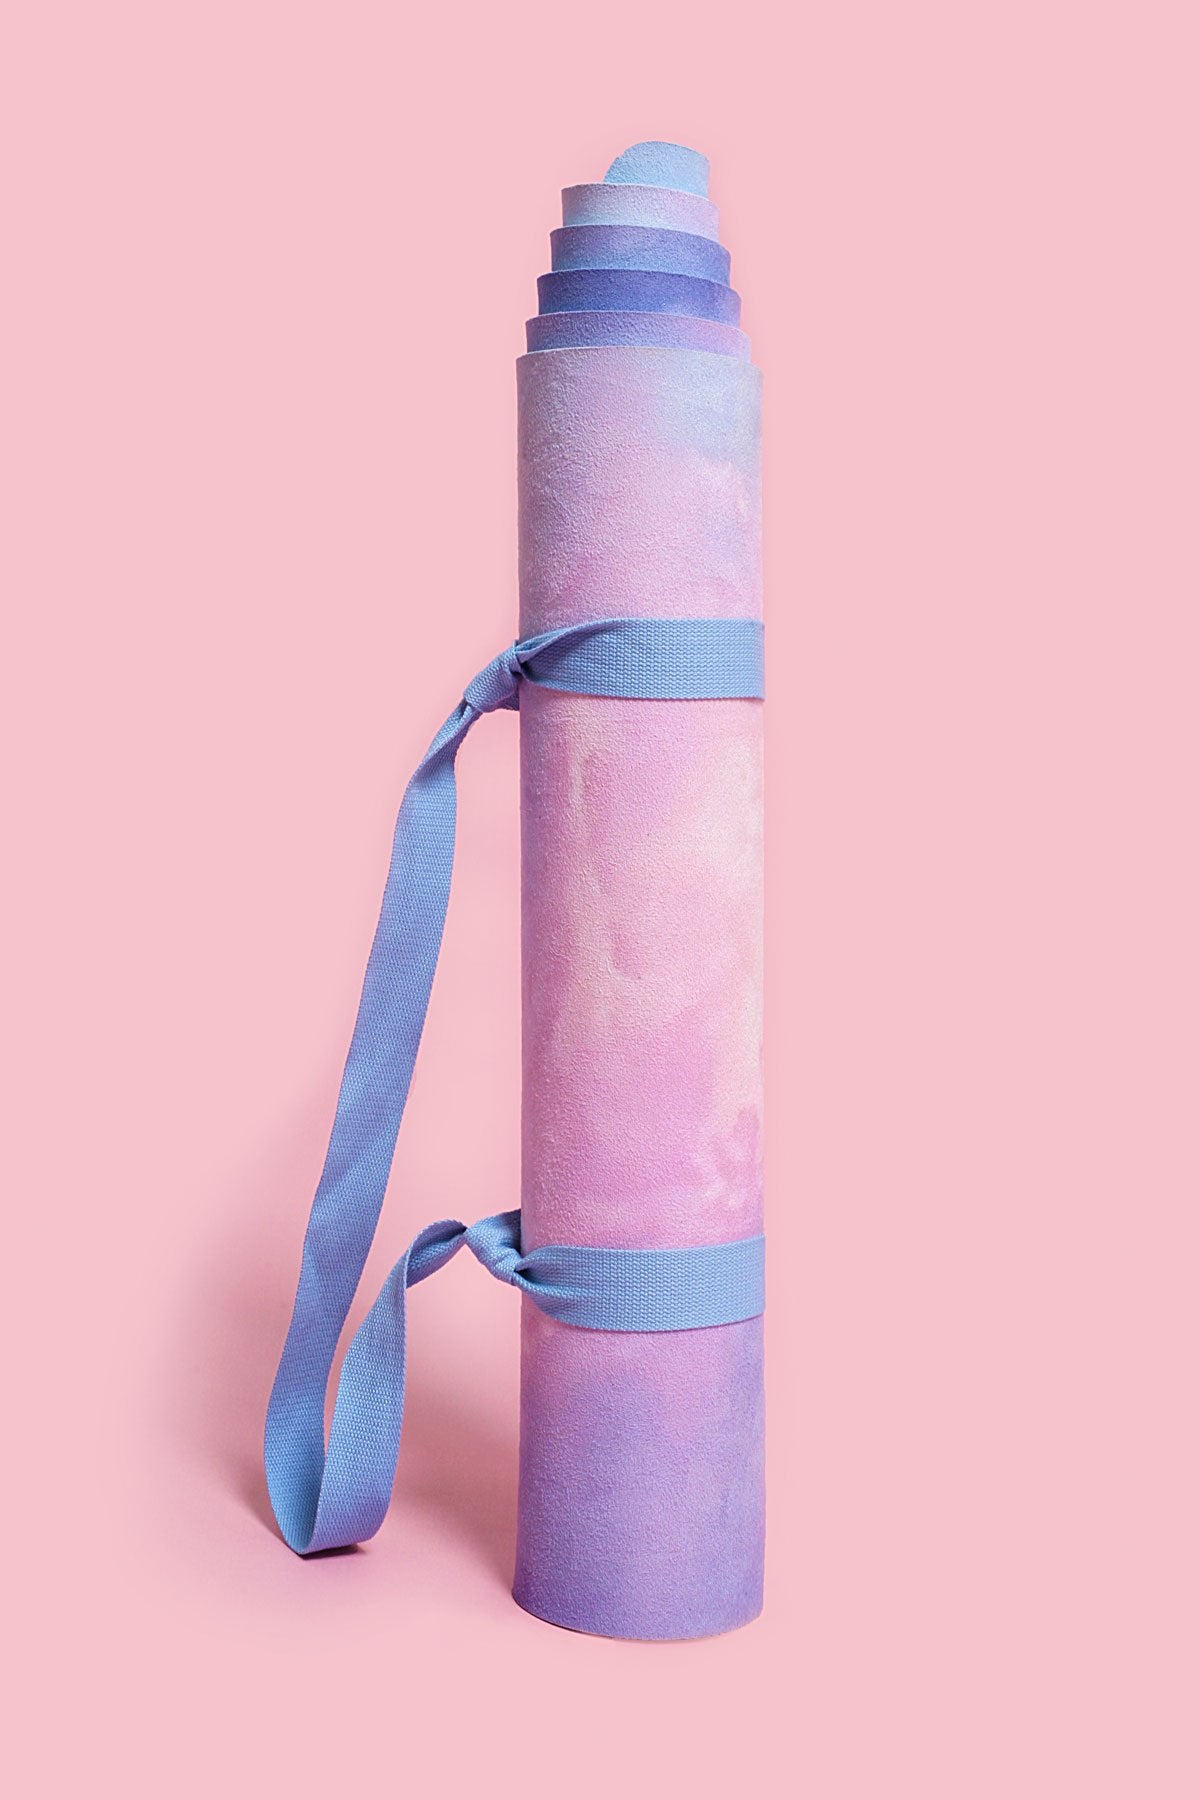 POPFLEX on X: SAY HELLO TO OUR SPRING 2021 YOGA MATS 🧘‍♀️ We